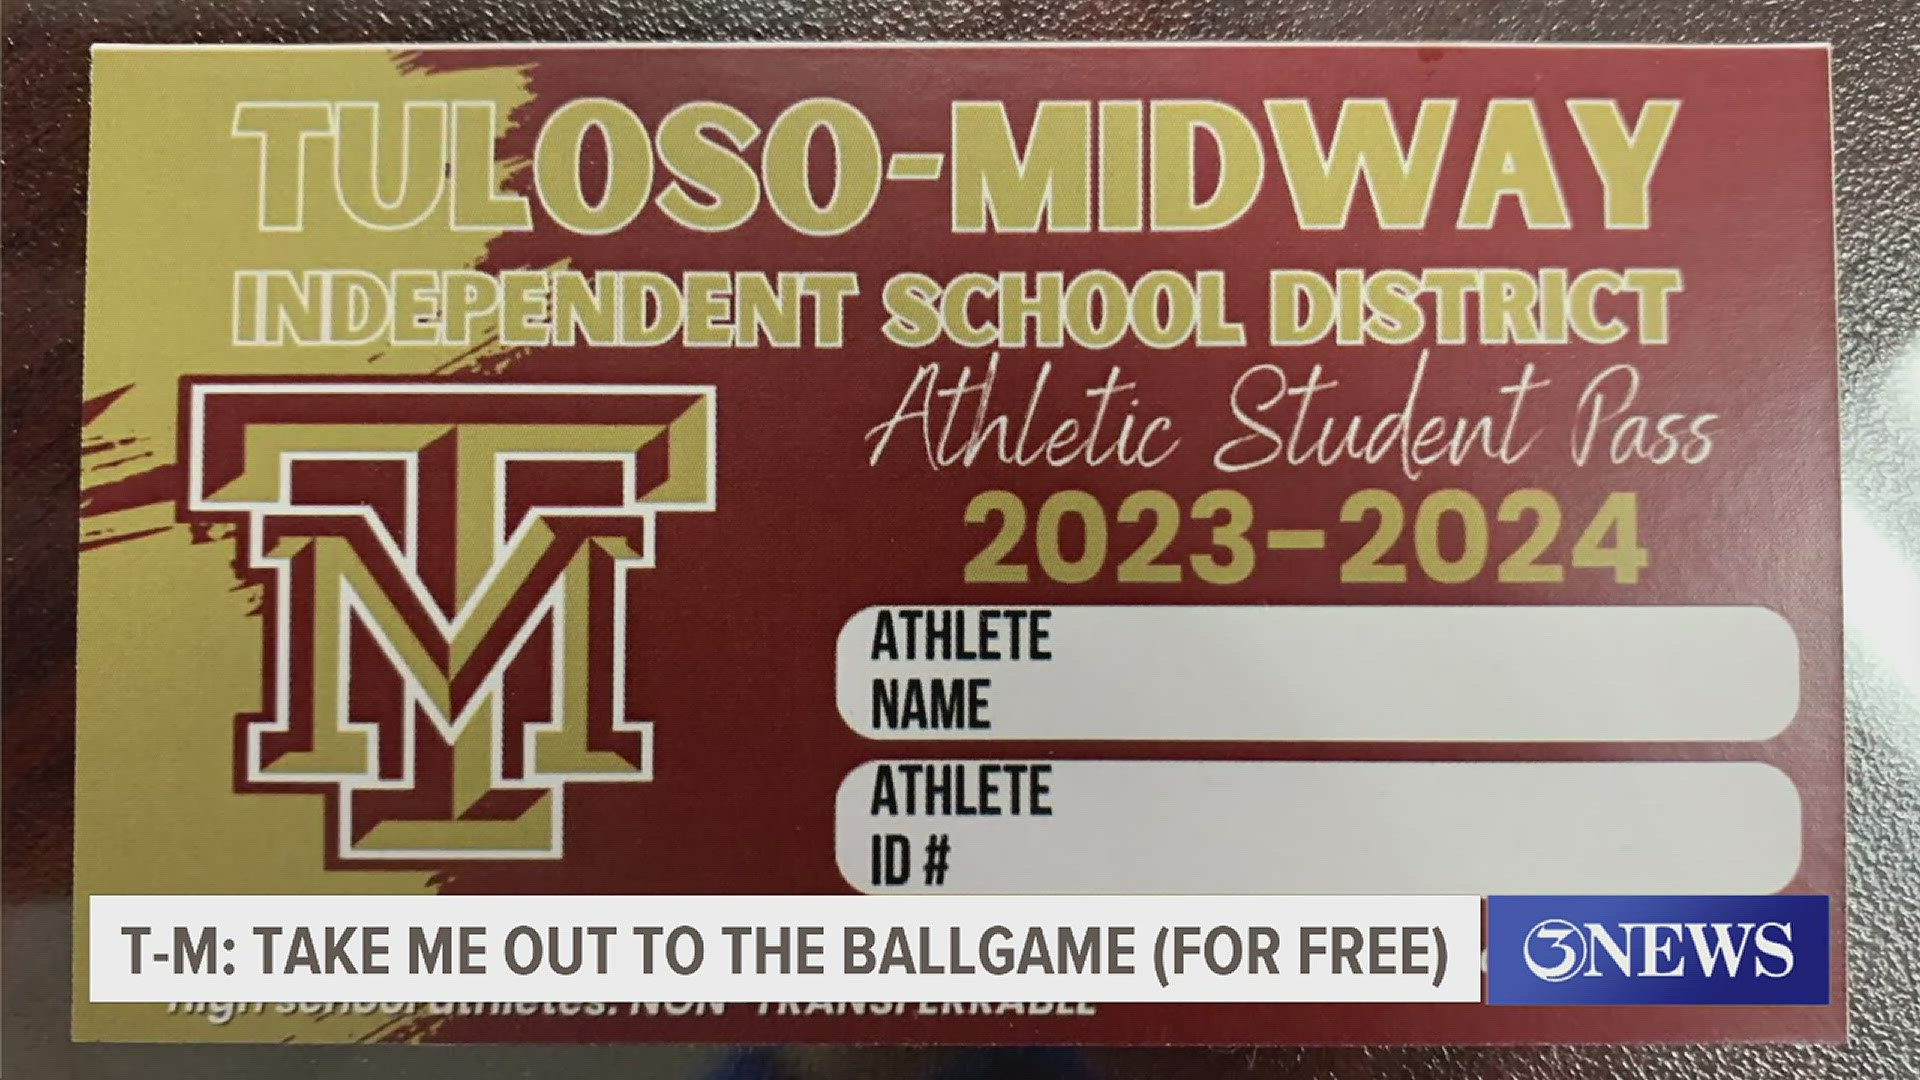 The Warriors and Cherokees' athletes received a pass this week that will get them into the school's home games for free.